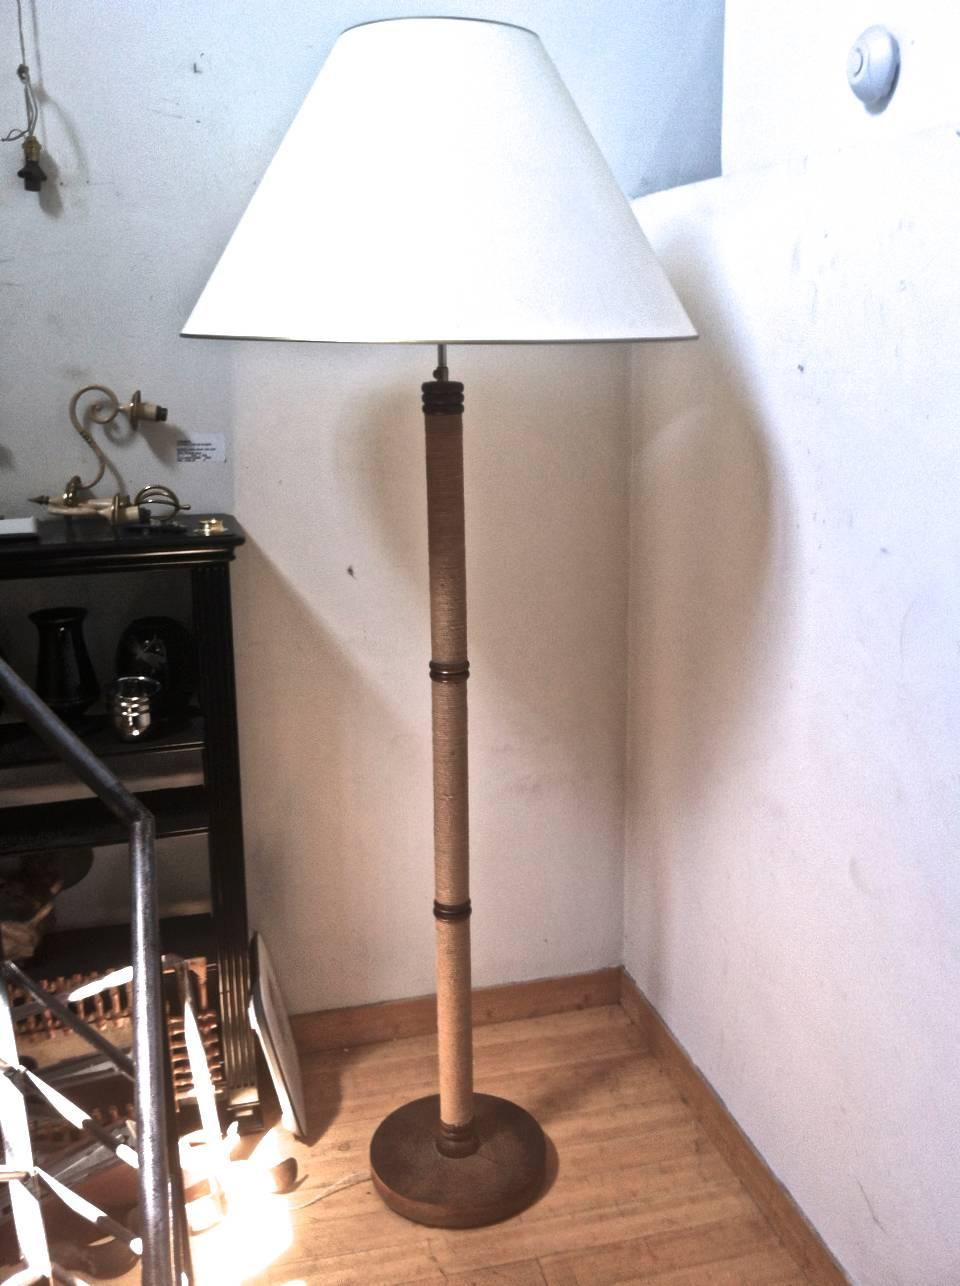 French Riviera Rare Modernist Brown Cerused Oak Rope Floor Lamp from the 1950s For Sale 4